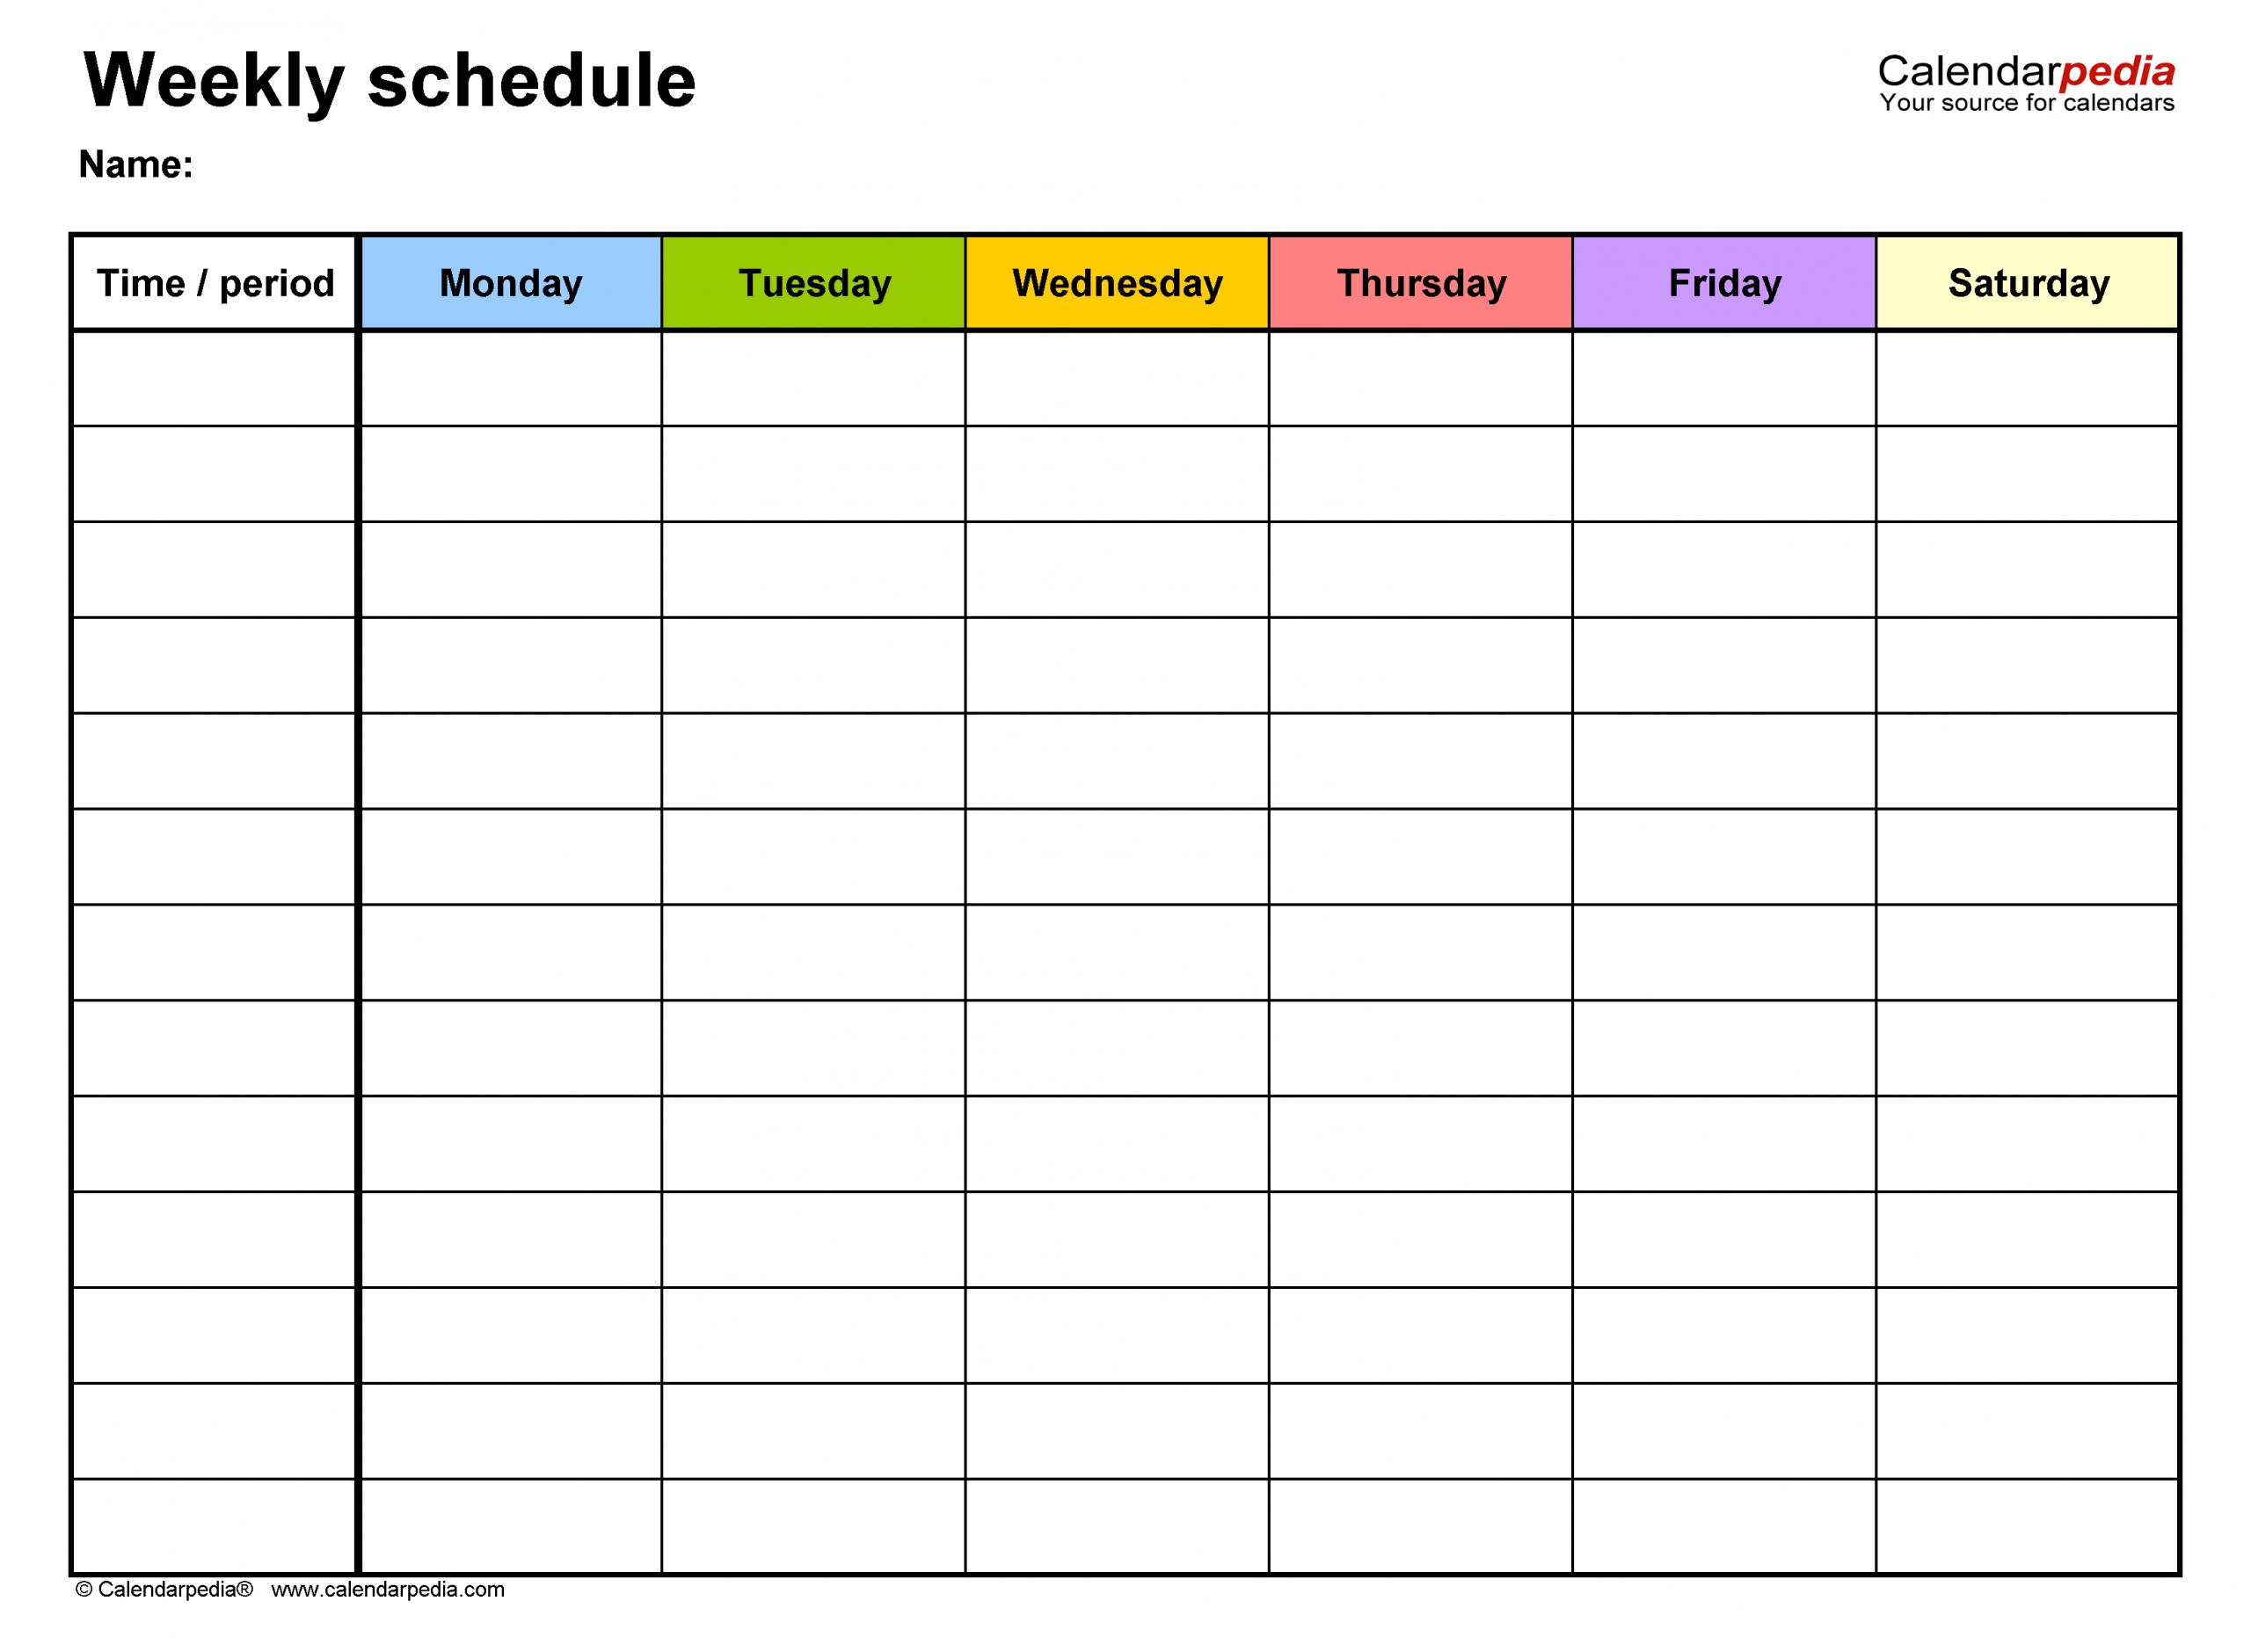 Free Weekly Schedule Templates For Excel - 18 Templates  Excel Calendar Templates Weekly